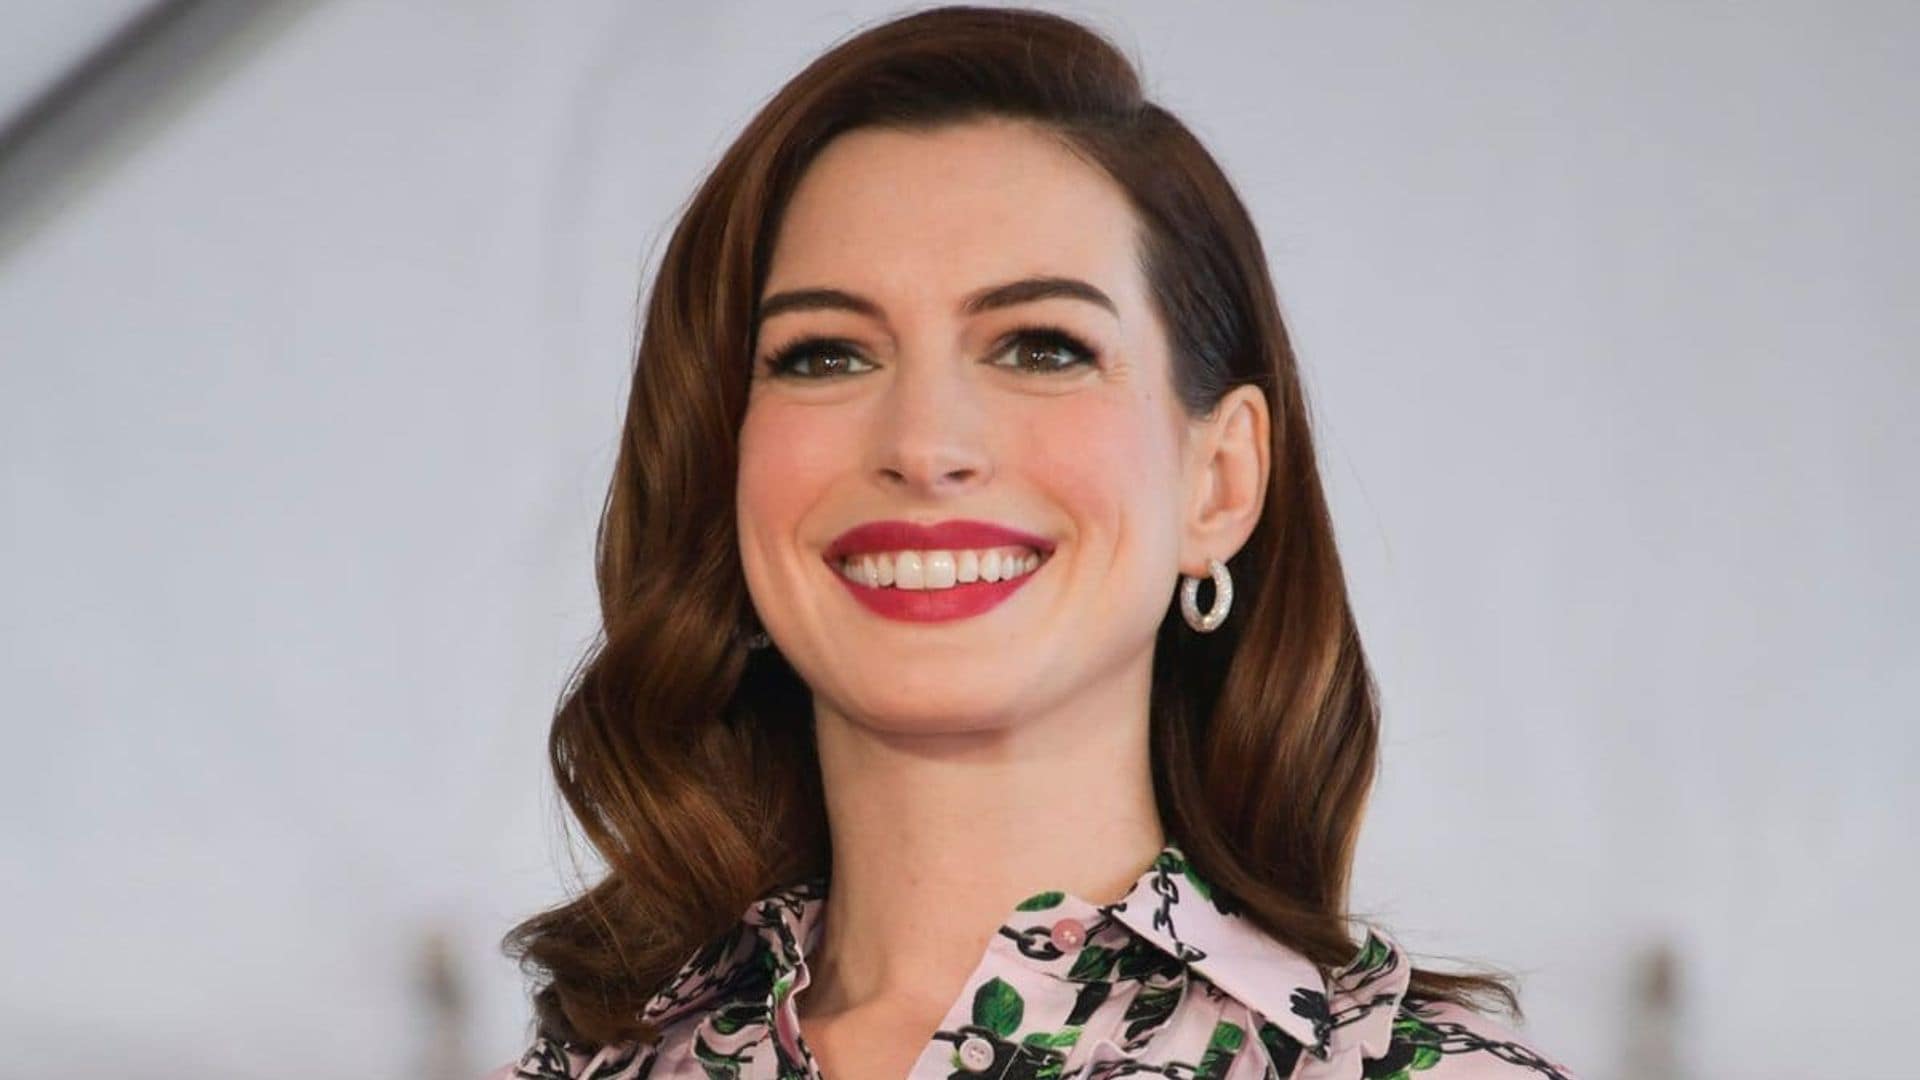 Anne Hathaway reveals she and her family spent 2020 eating comfort food from the frozen aisle